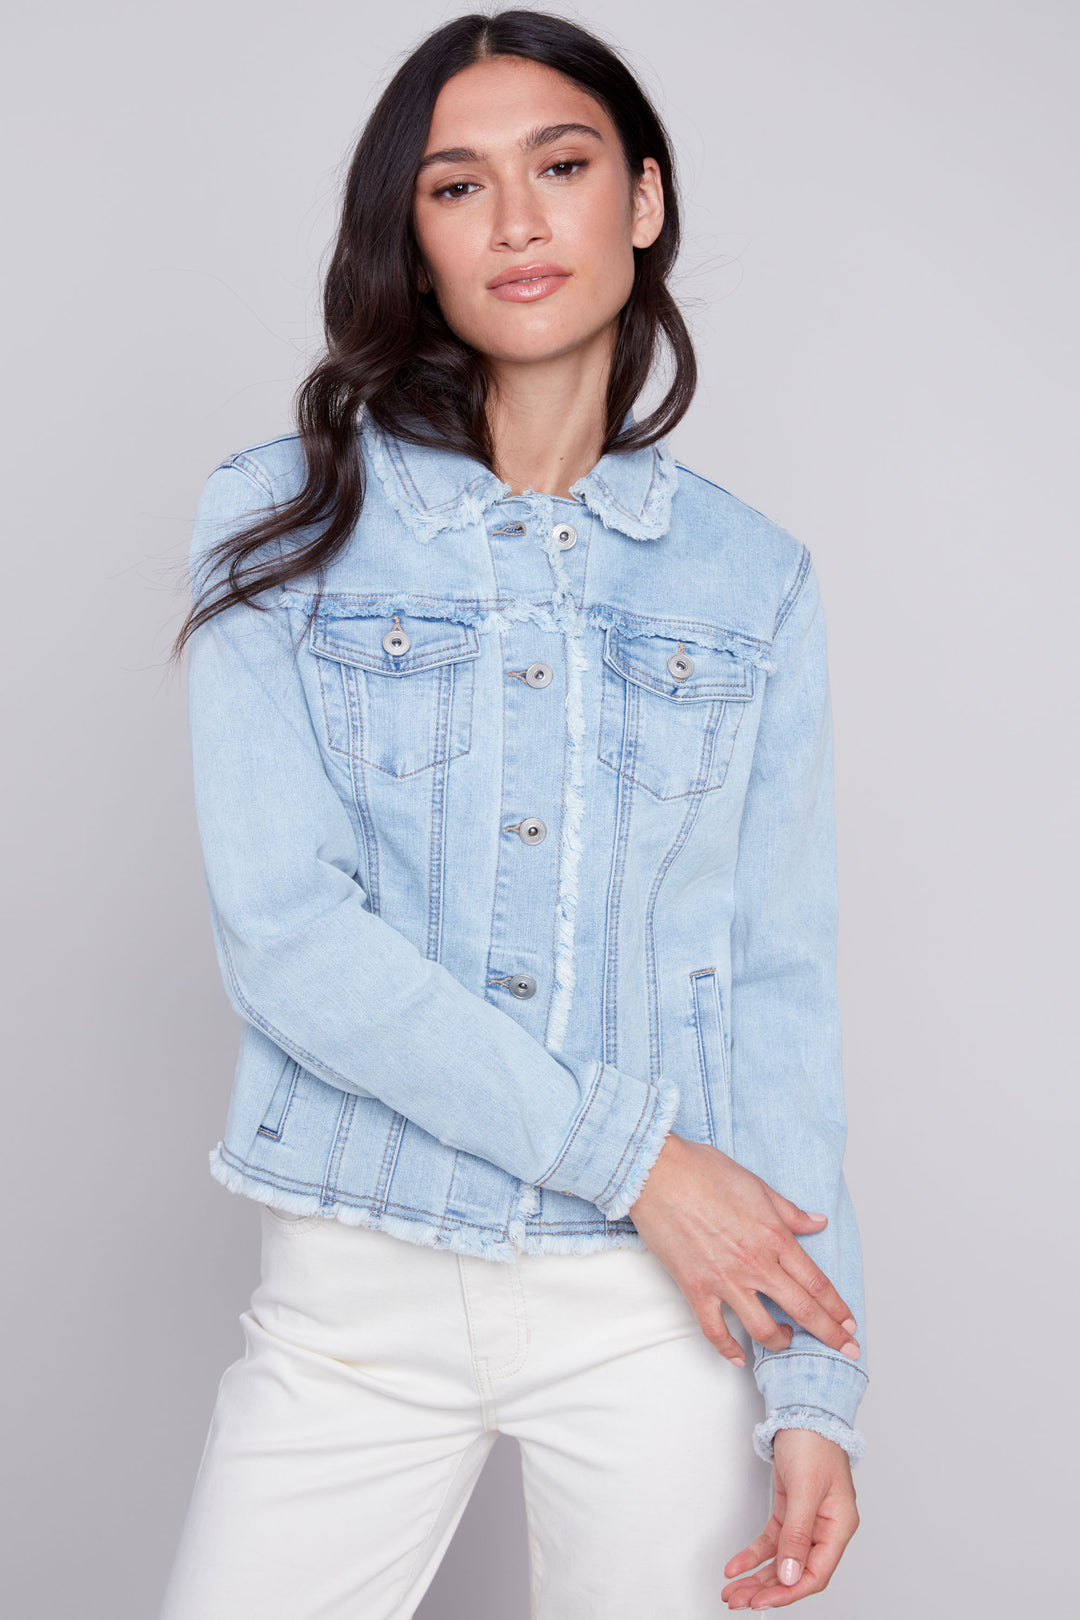 From cool nights to warmer days this jacket is a fresh take on a classic favourite! 